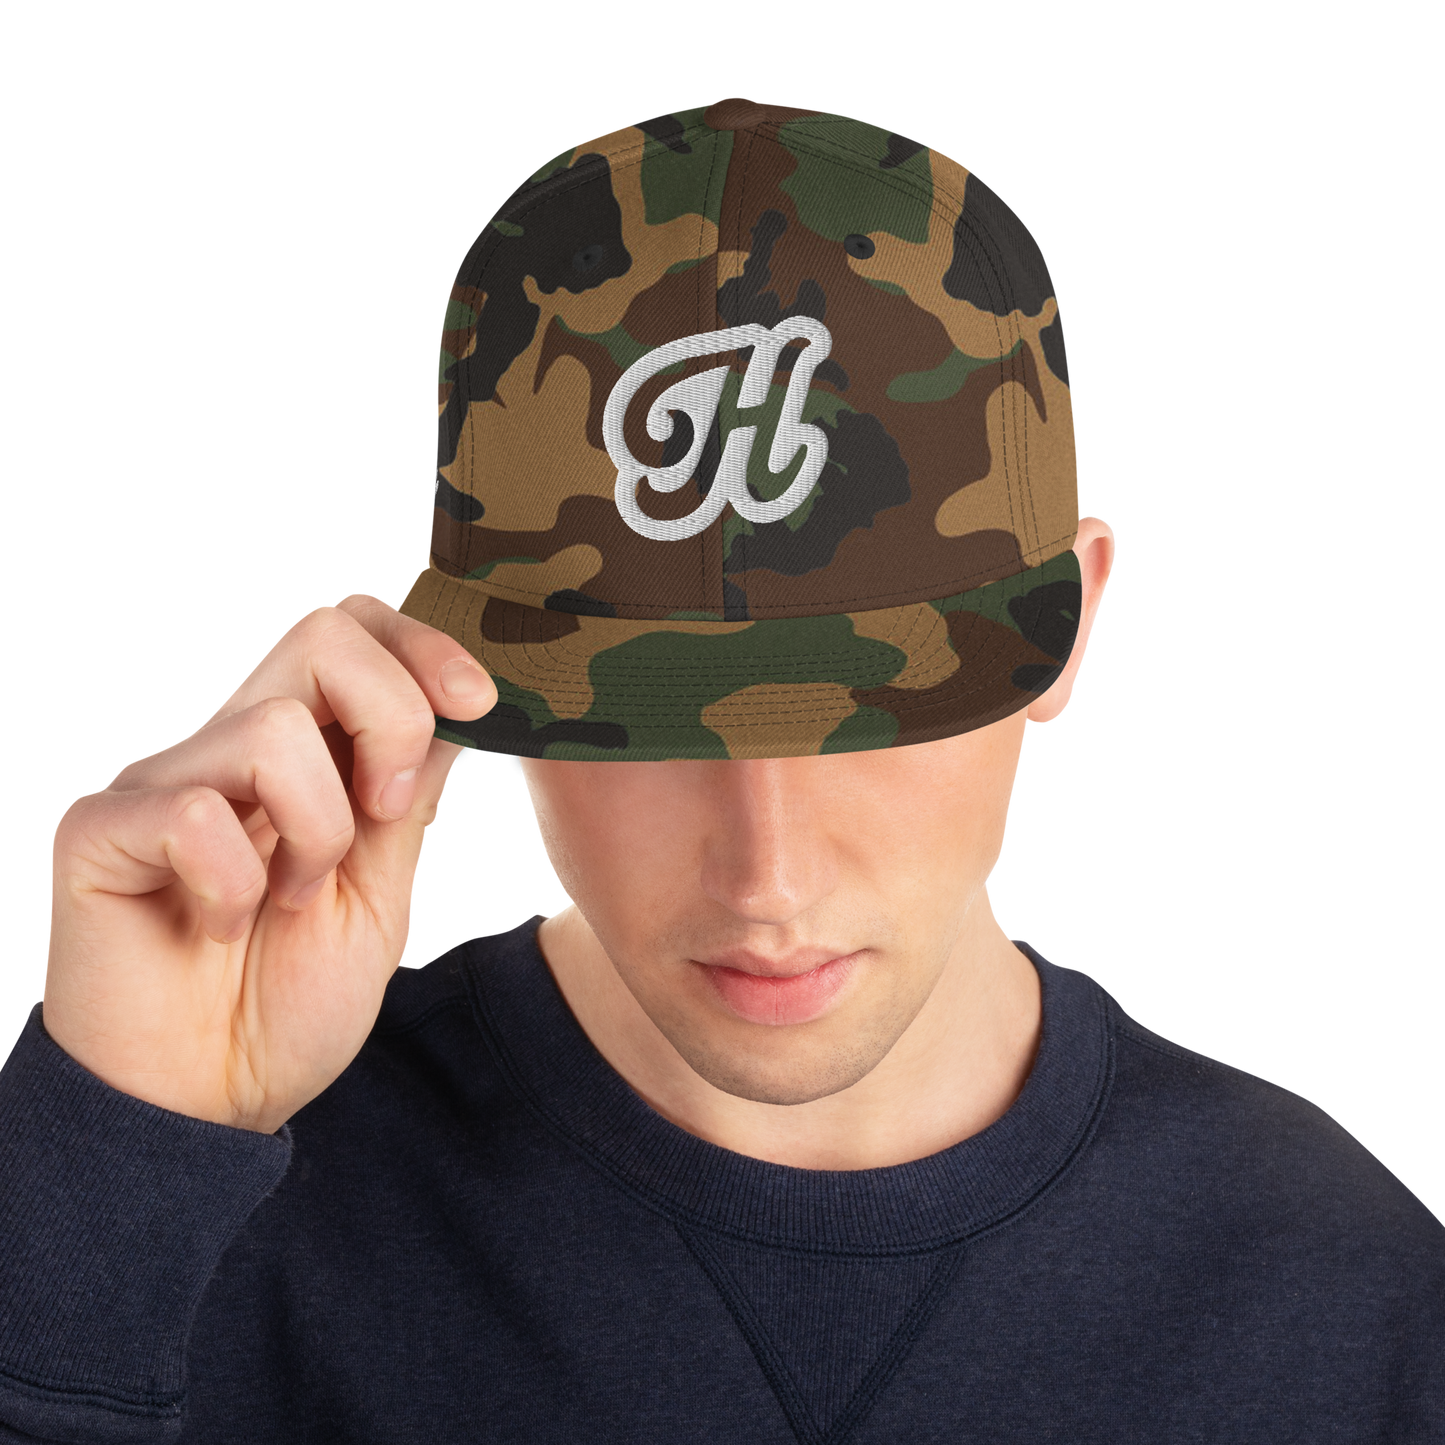 "The H" Snapback Hat